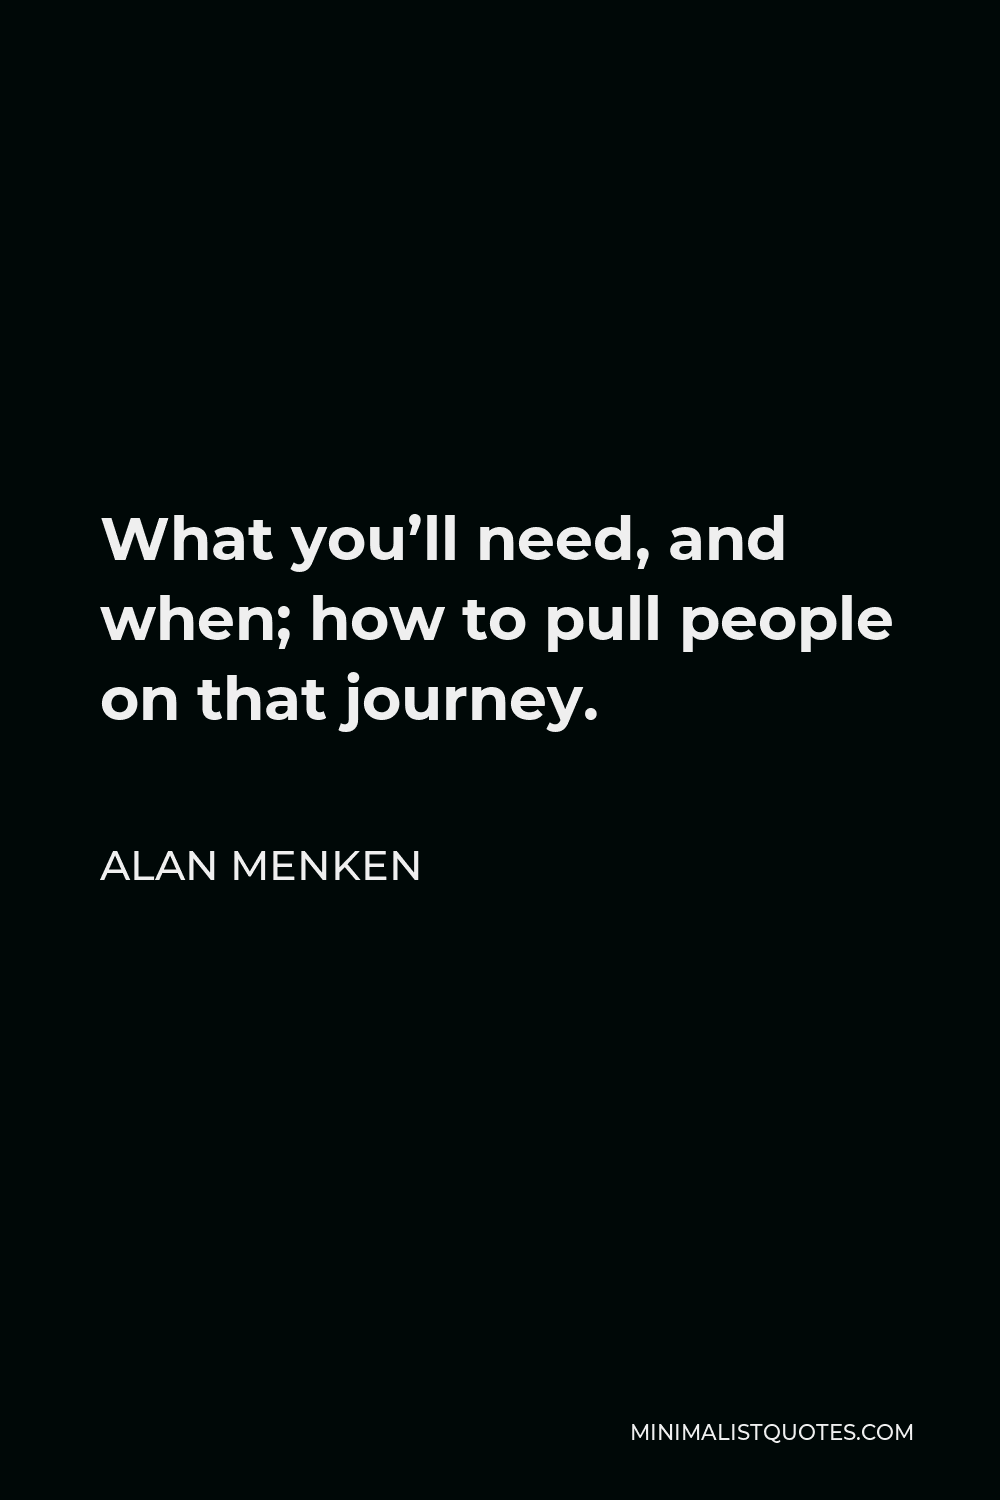 Alan Menken Quote - What you’ll need, and when; how to pull people on that journey.